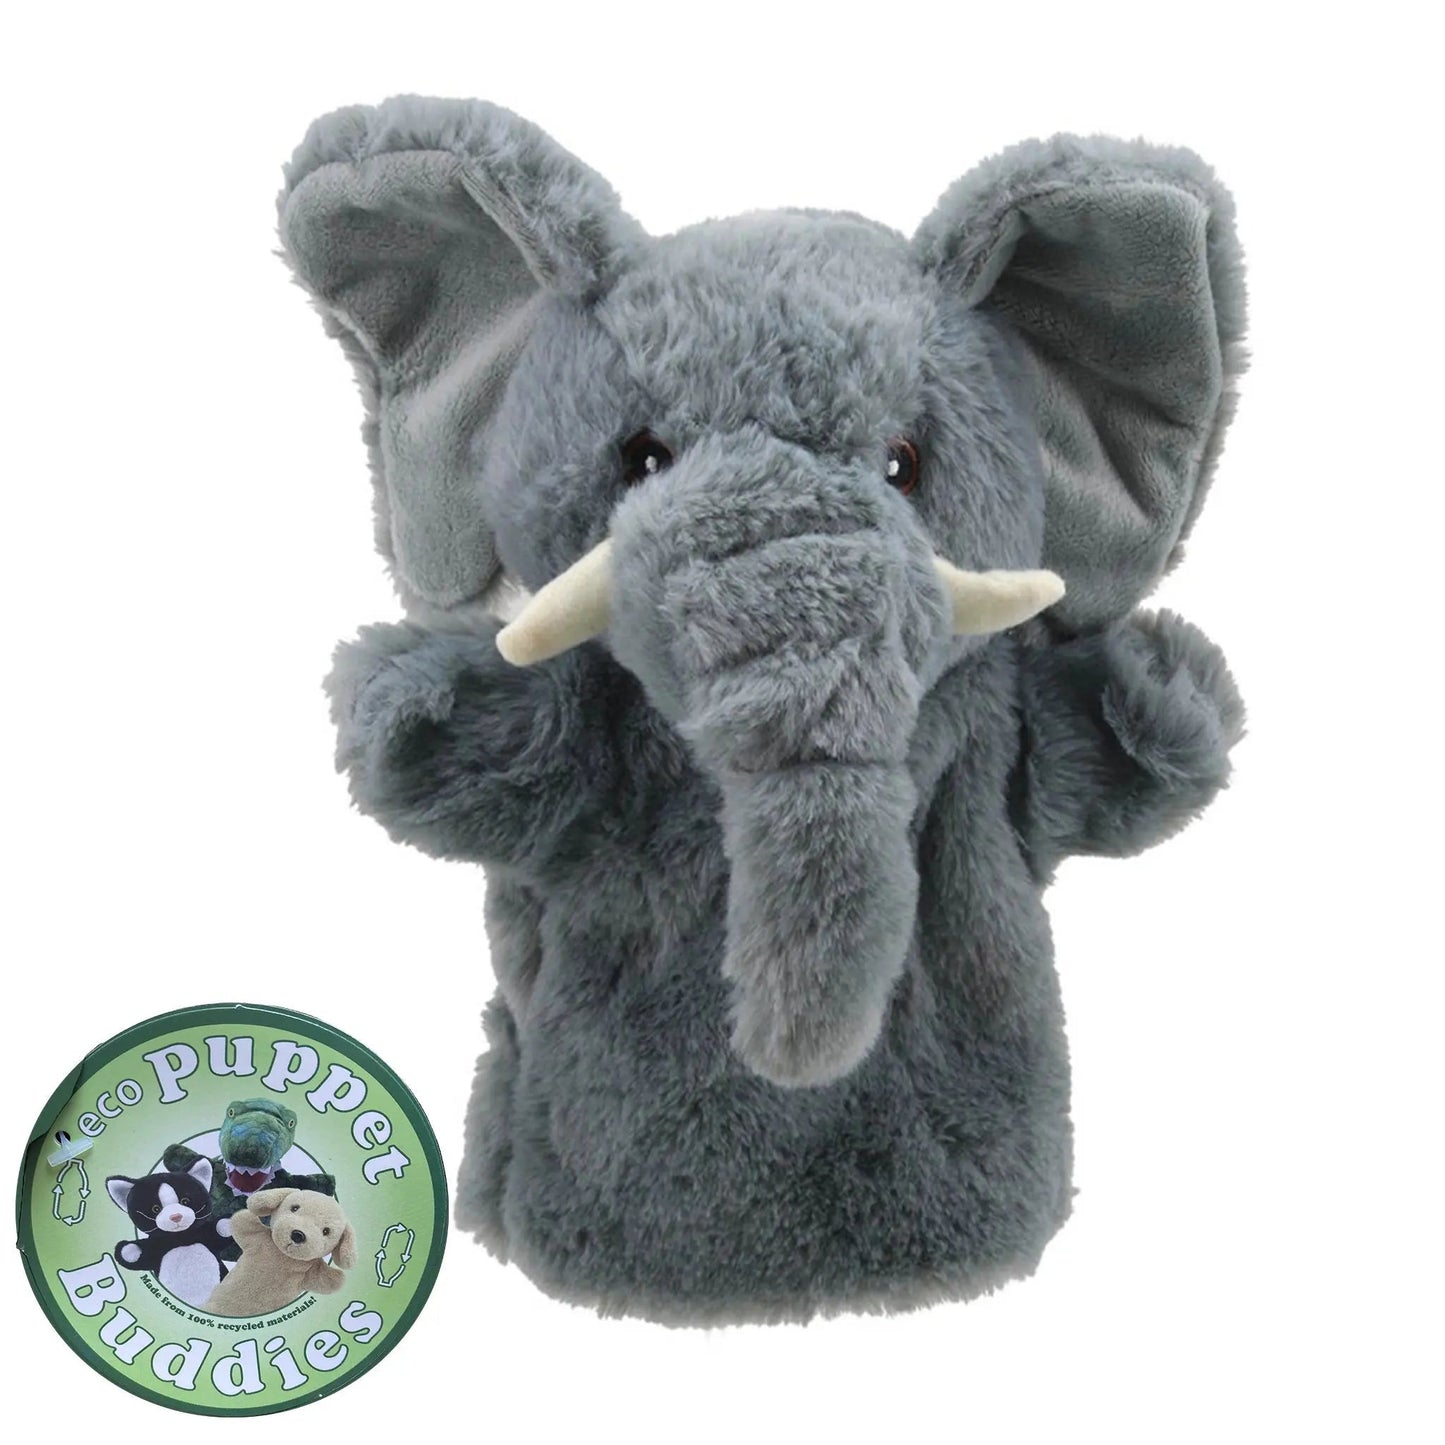 Elephant Eco Puppet Buddies Hand Puppet - The Puppet Company - The Forgotten Toy Shop